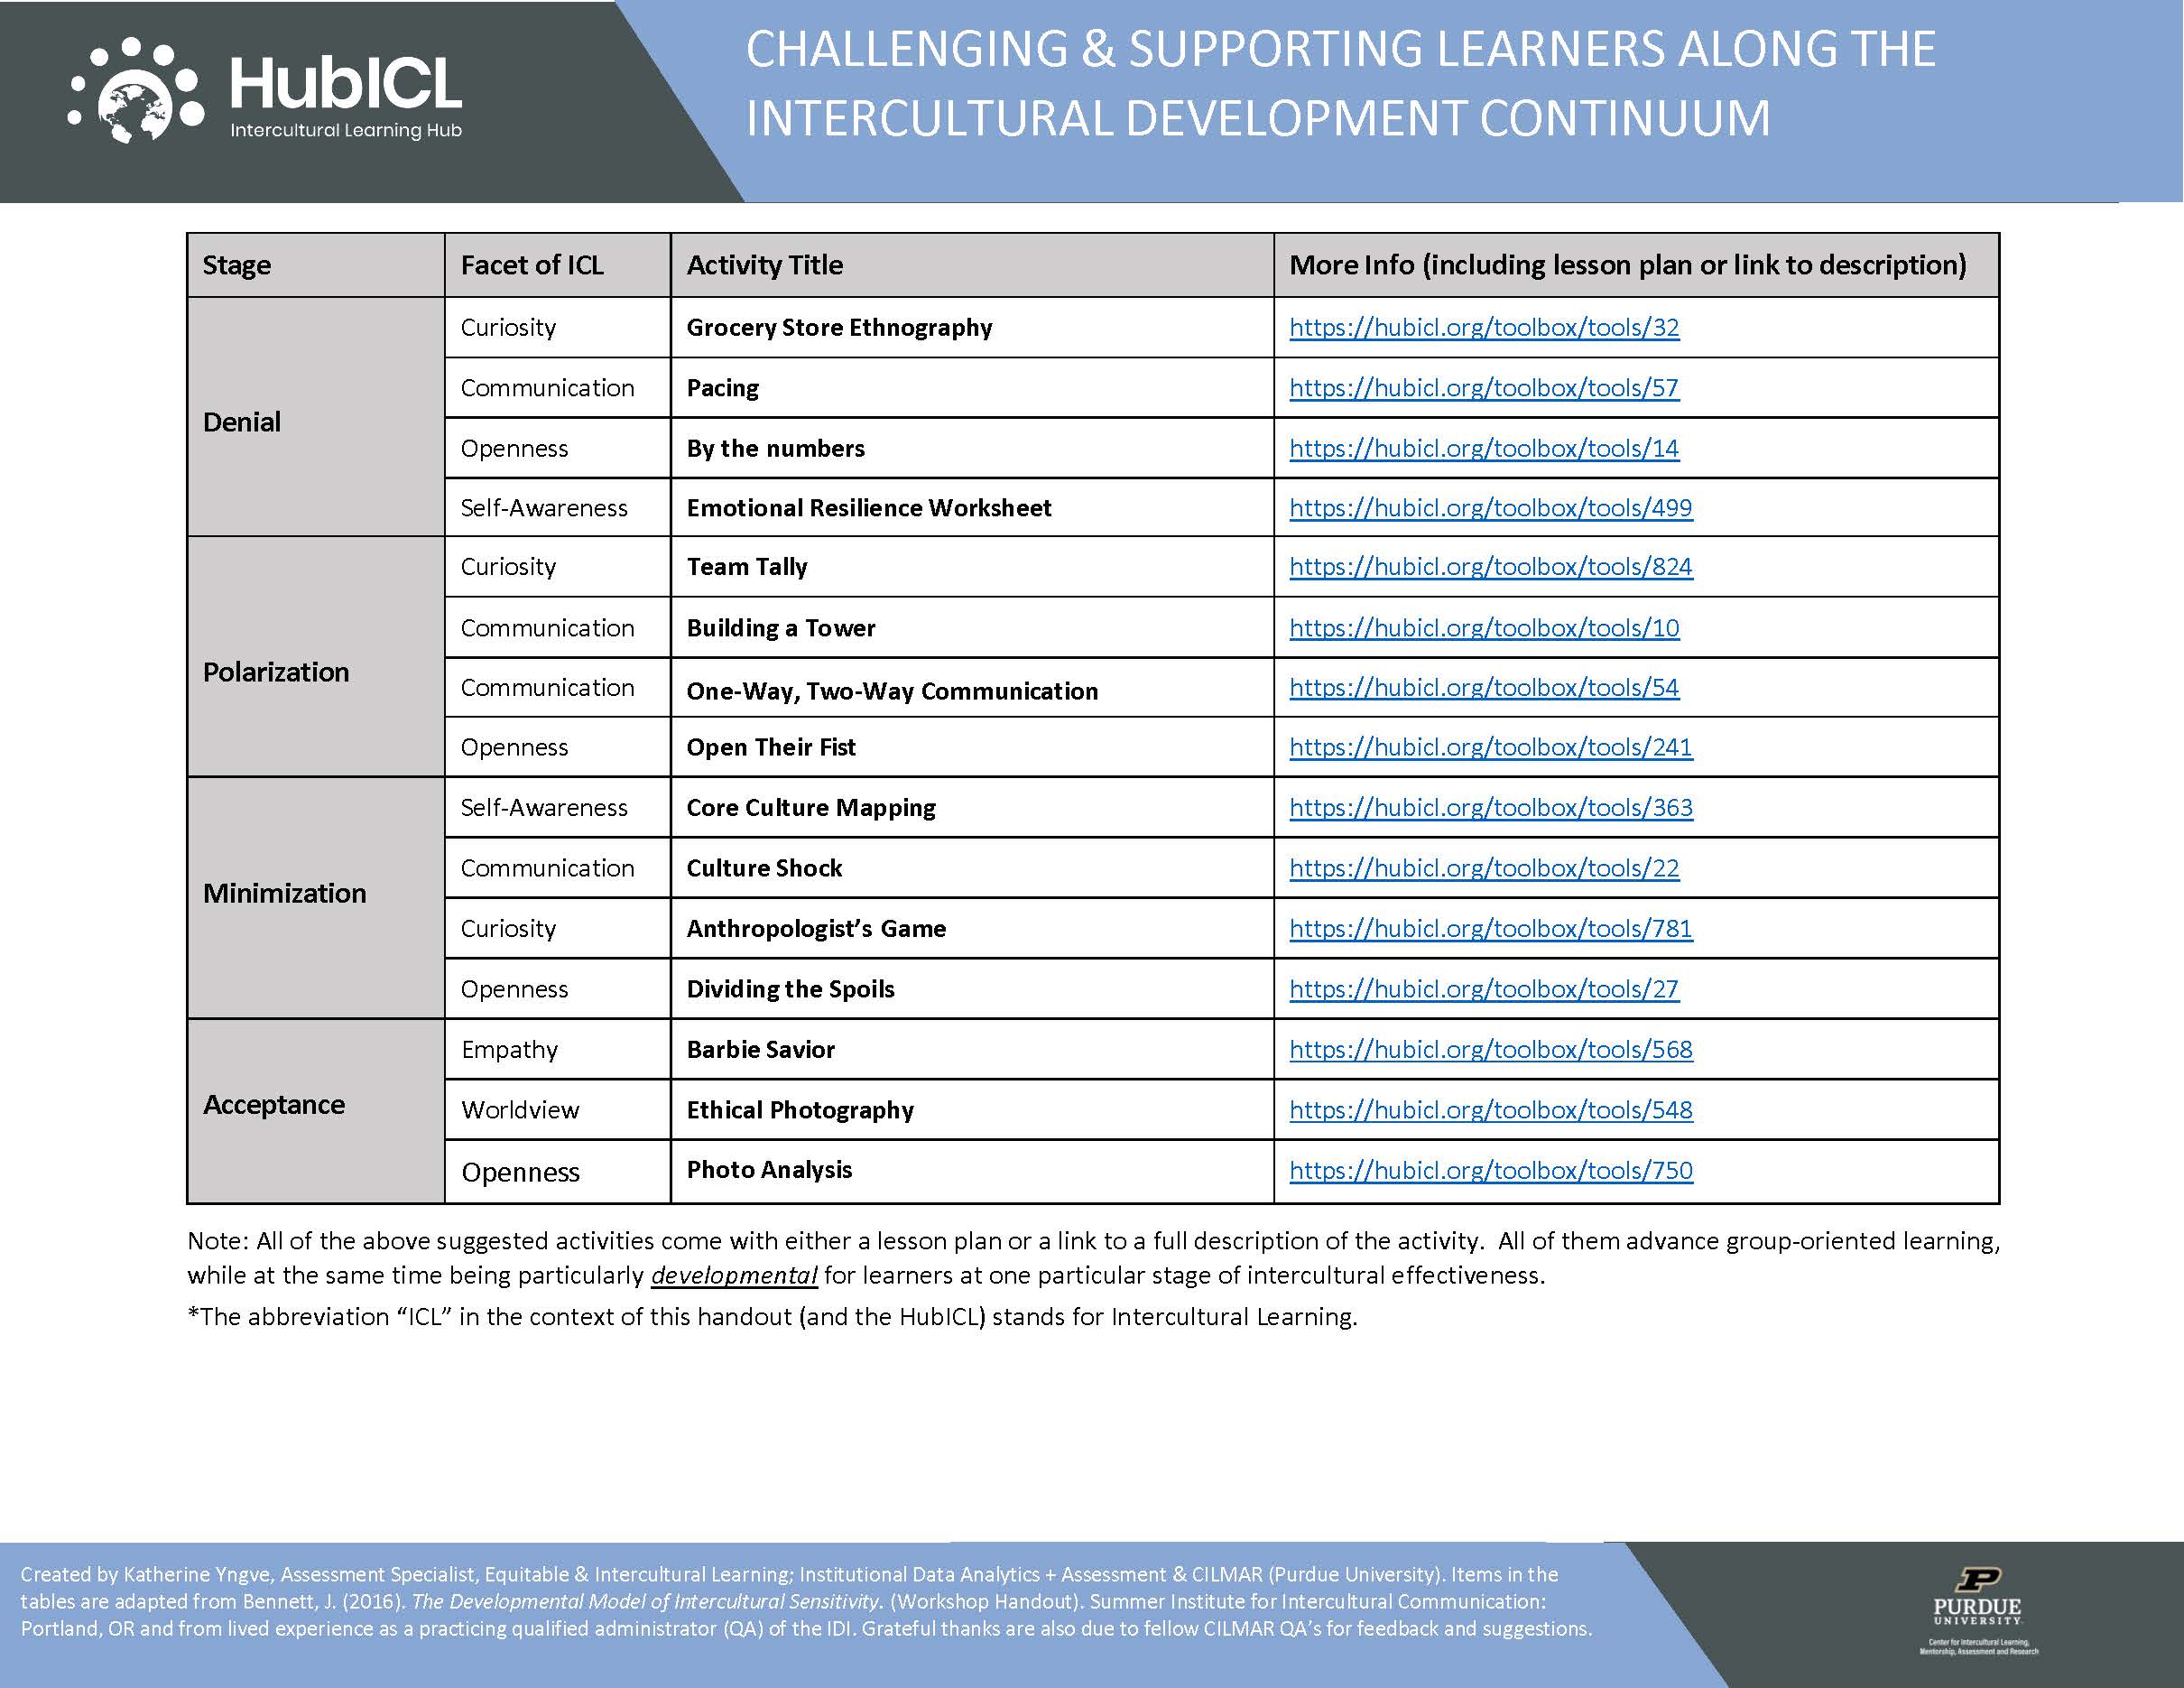 IDC learner challenge and support table, page 2